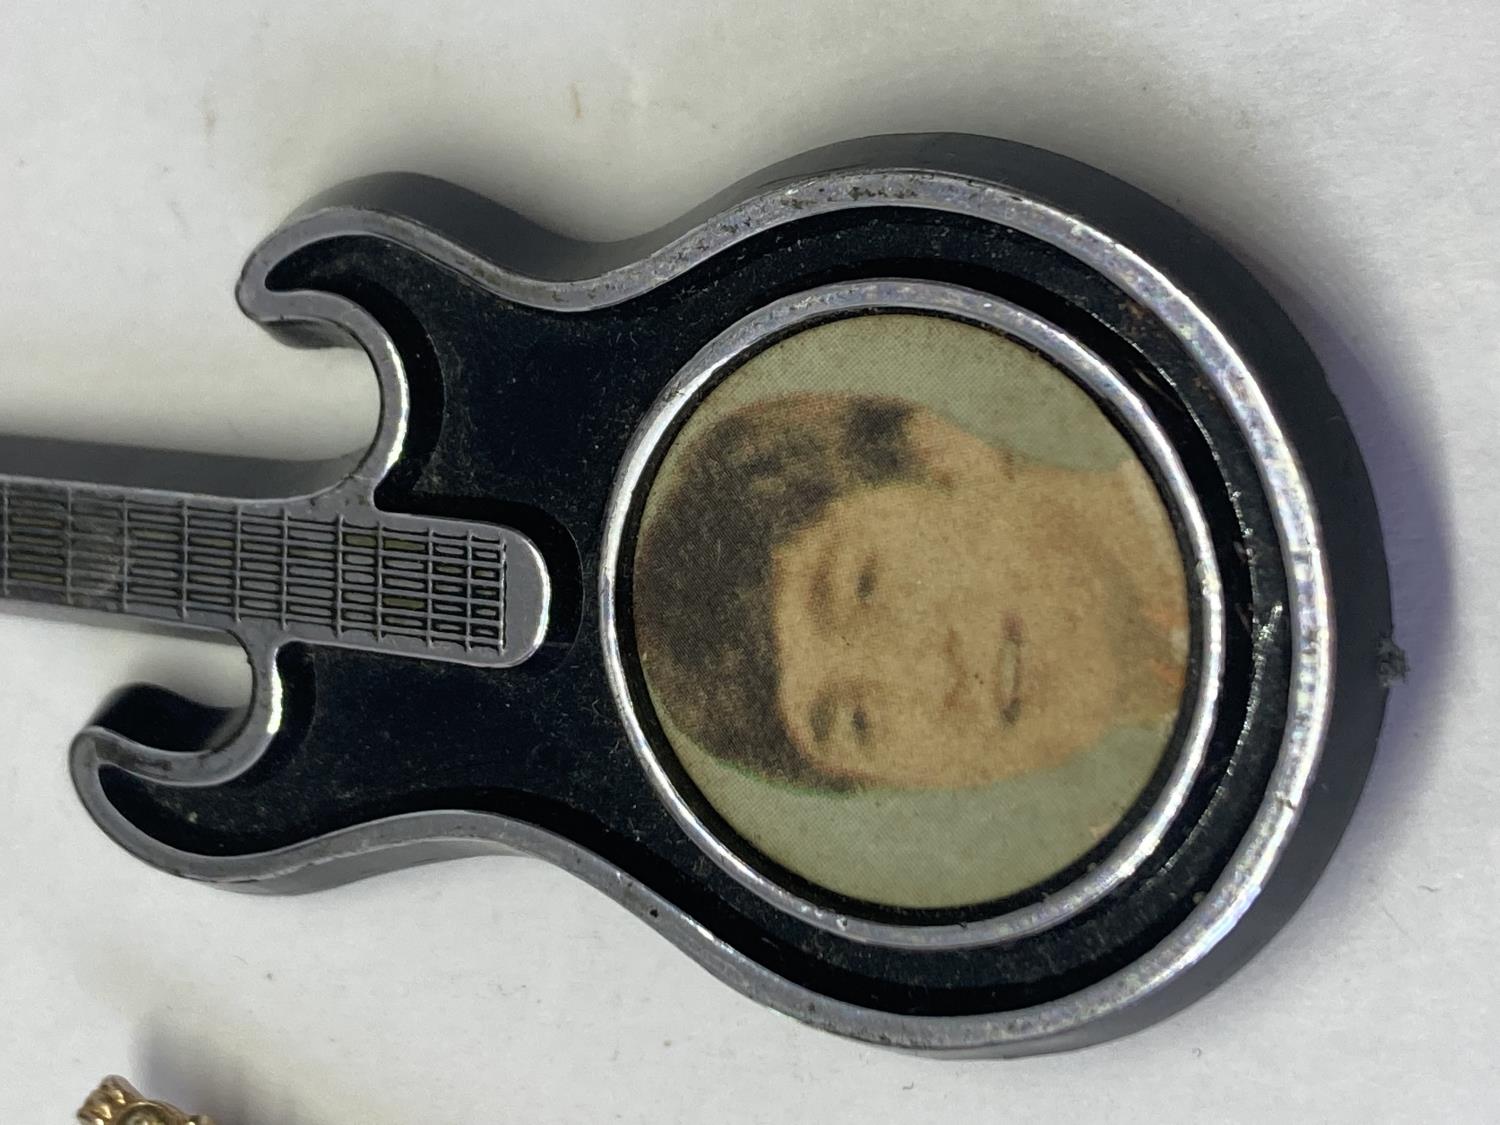 A RARE VINTAGE BEATLES GUITAR BROOCH AND A MOTHER OF PEARL EXAMPLE - Image 4 of 10